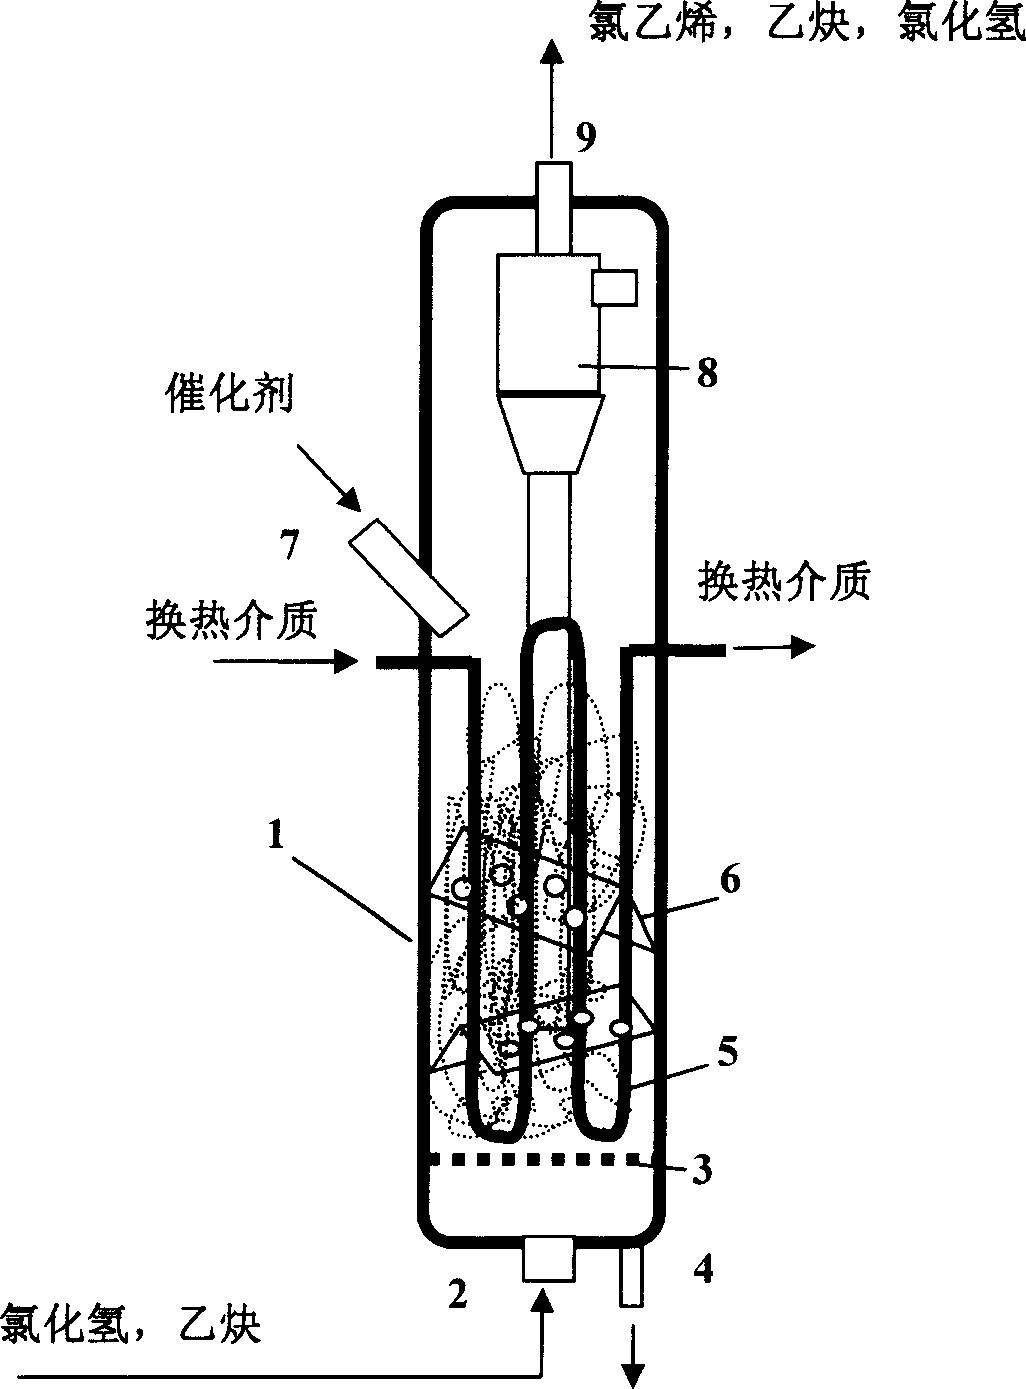 Fluidized bed reactor for preparing vinyl chloride by hydrogen chloride and acetylene reaction and method